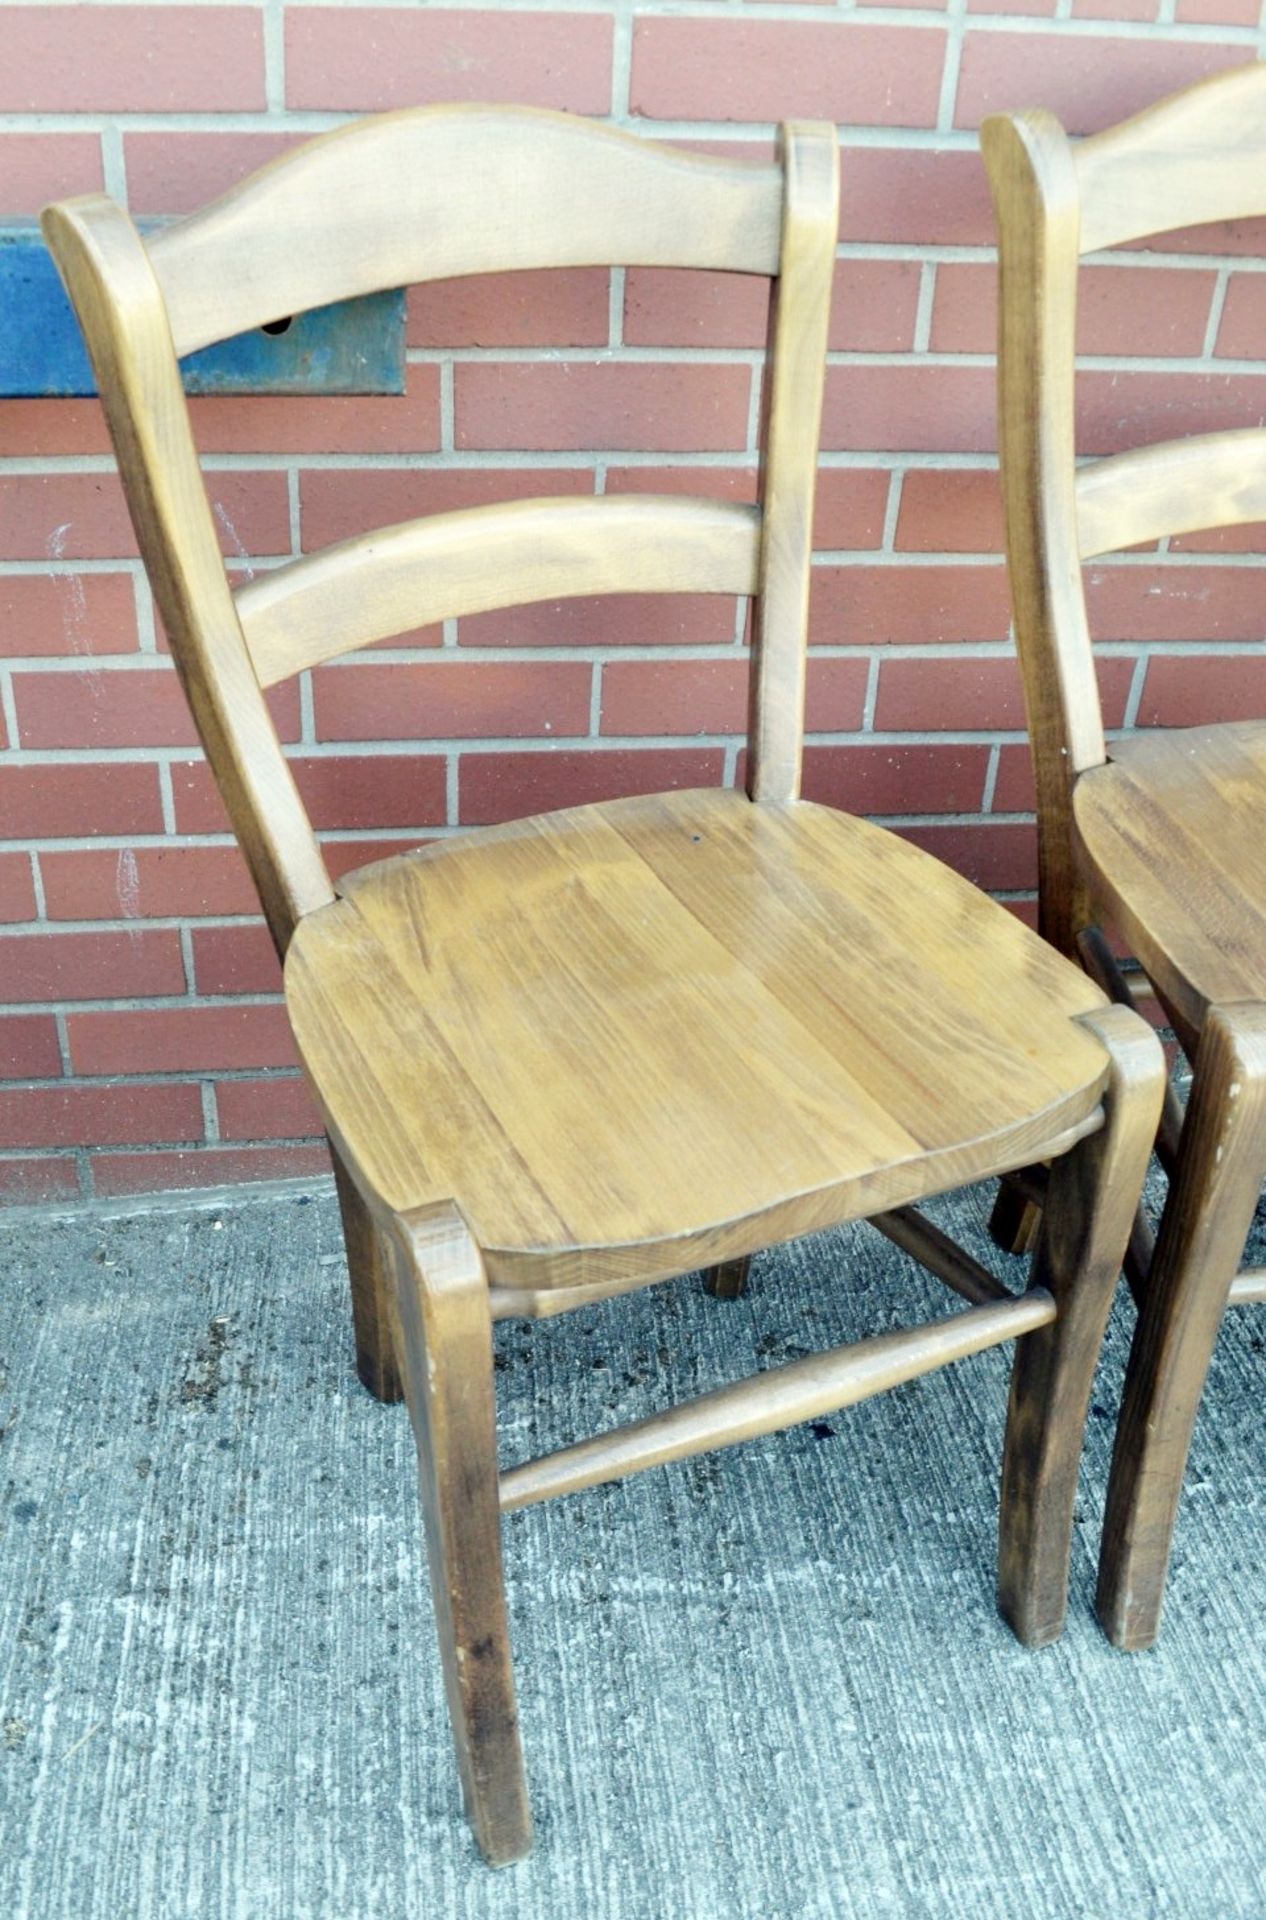 3 x Matching Sturdy Solid Wood Chairs With An Attractive Varnished Finish - Dimensions: H90 x W47 - Image 6 of 6